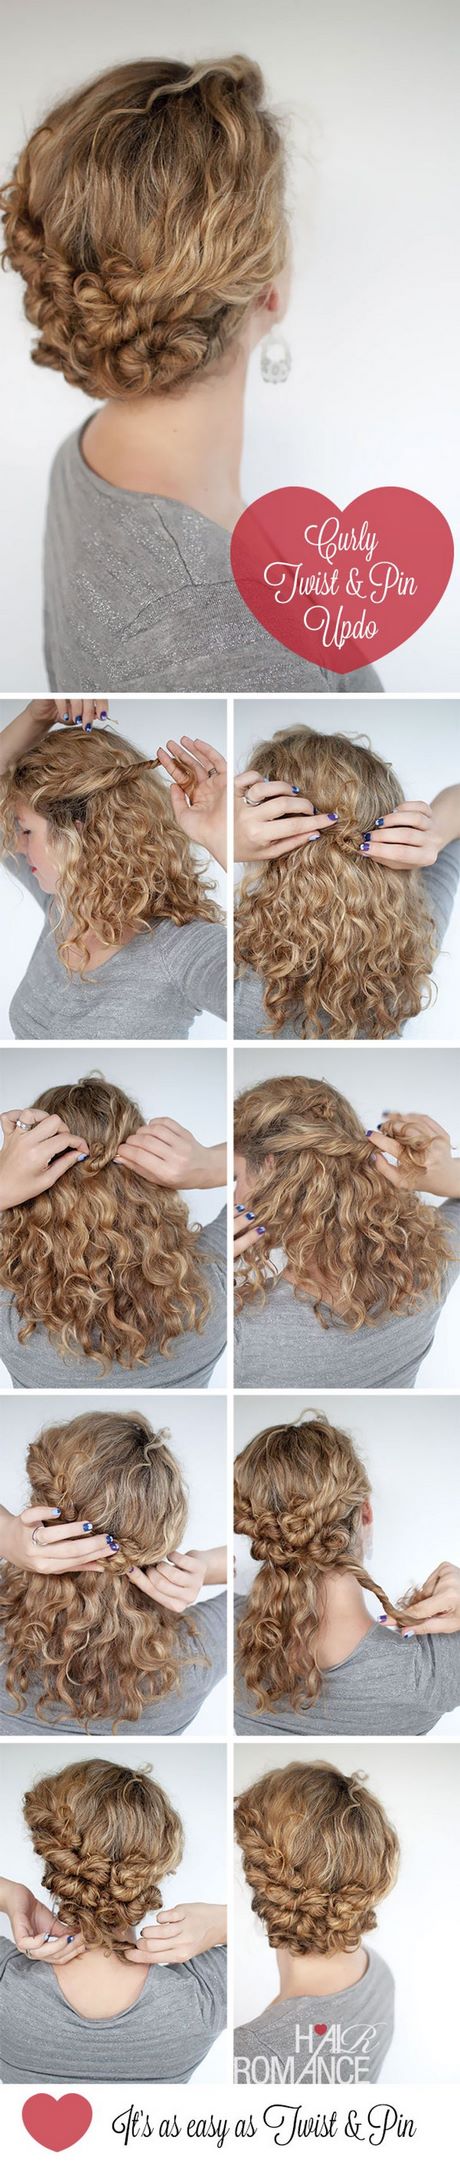 Pretty hairstyles for short curly hair pretty-hairstyles-for-short-curly-hair-47_5